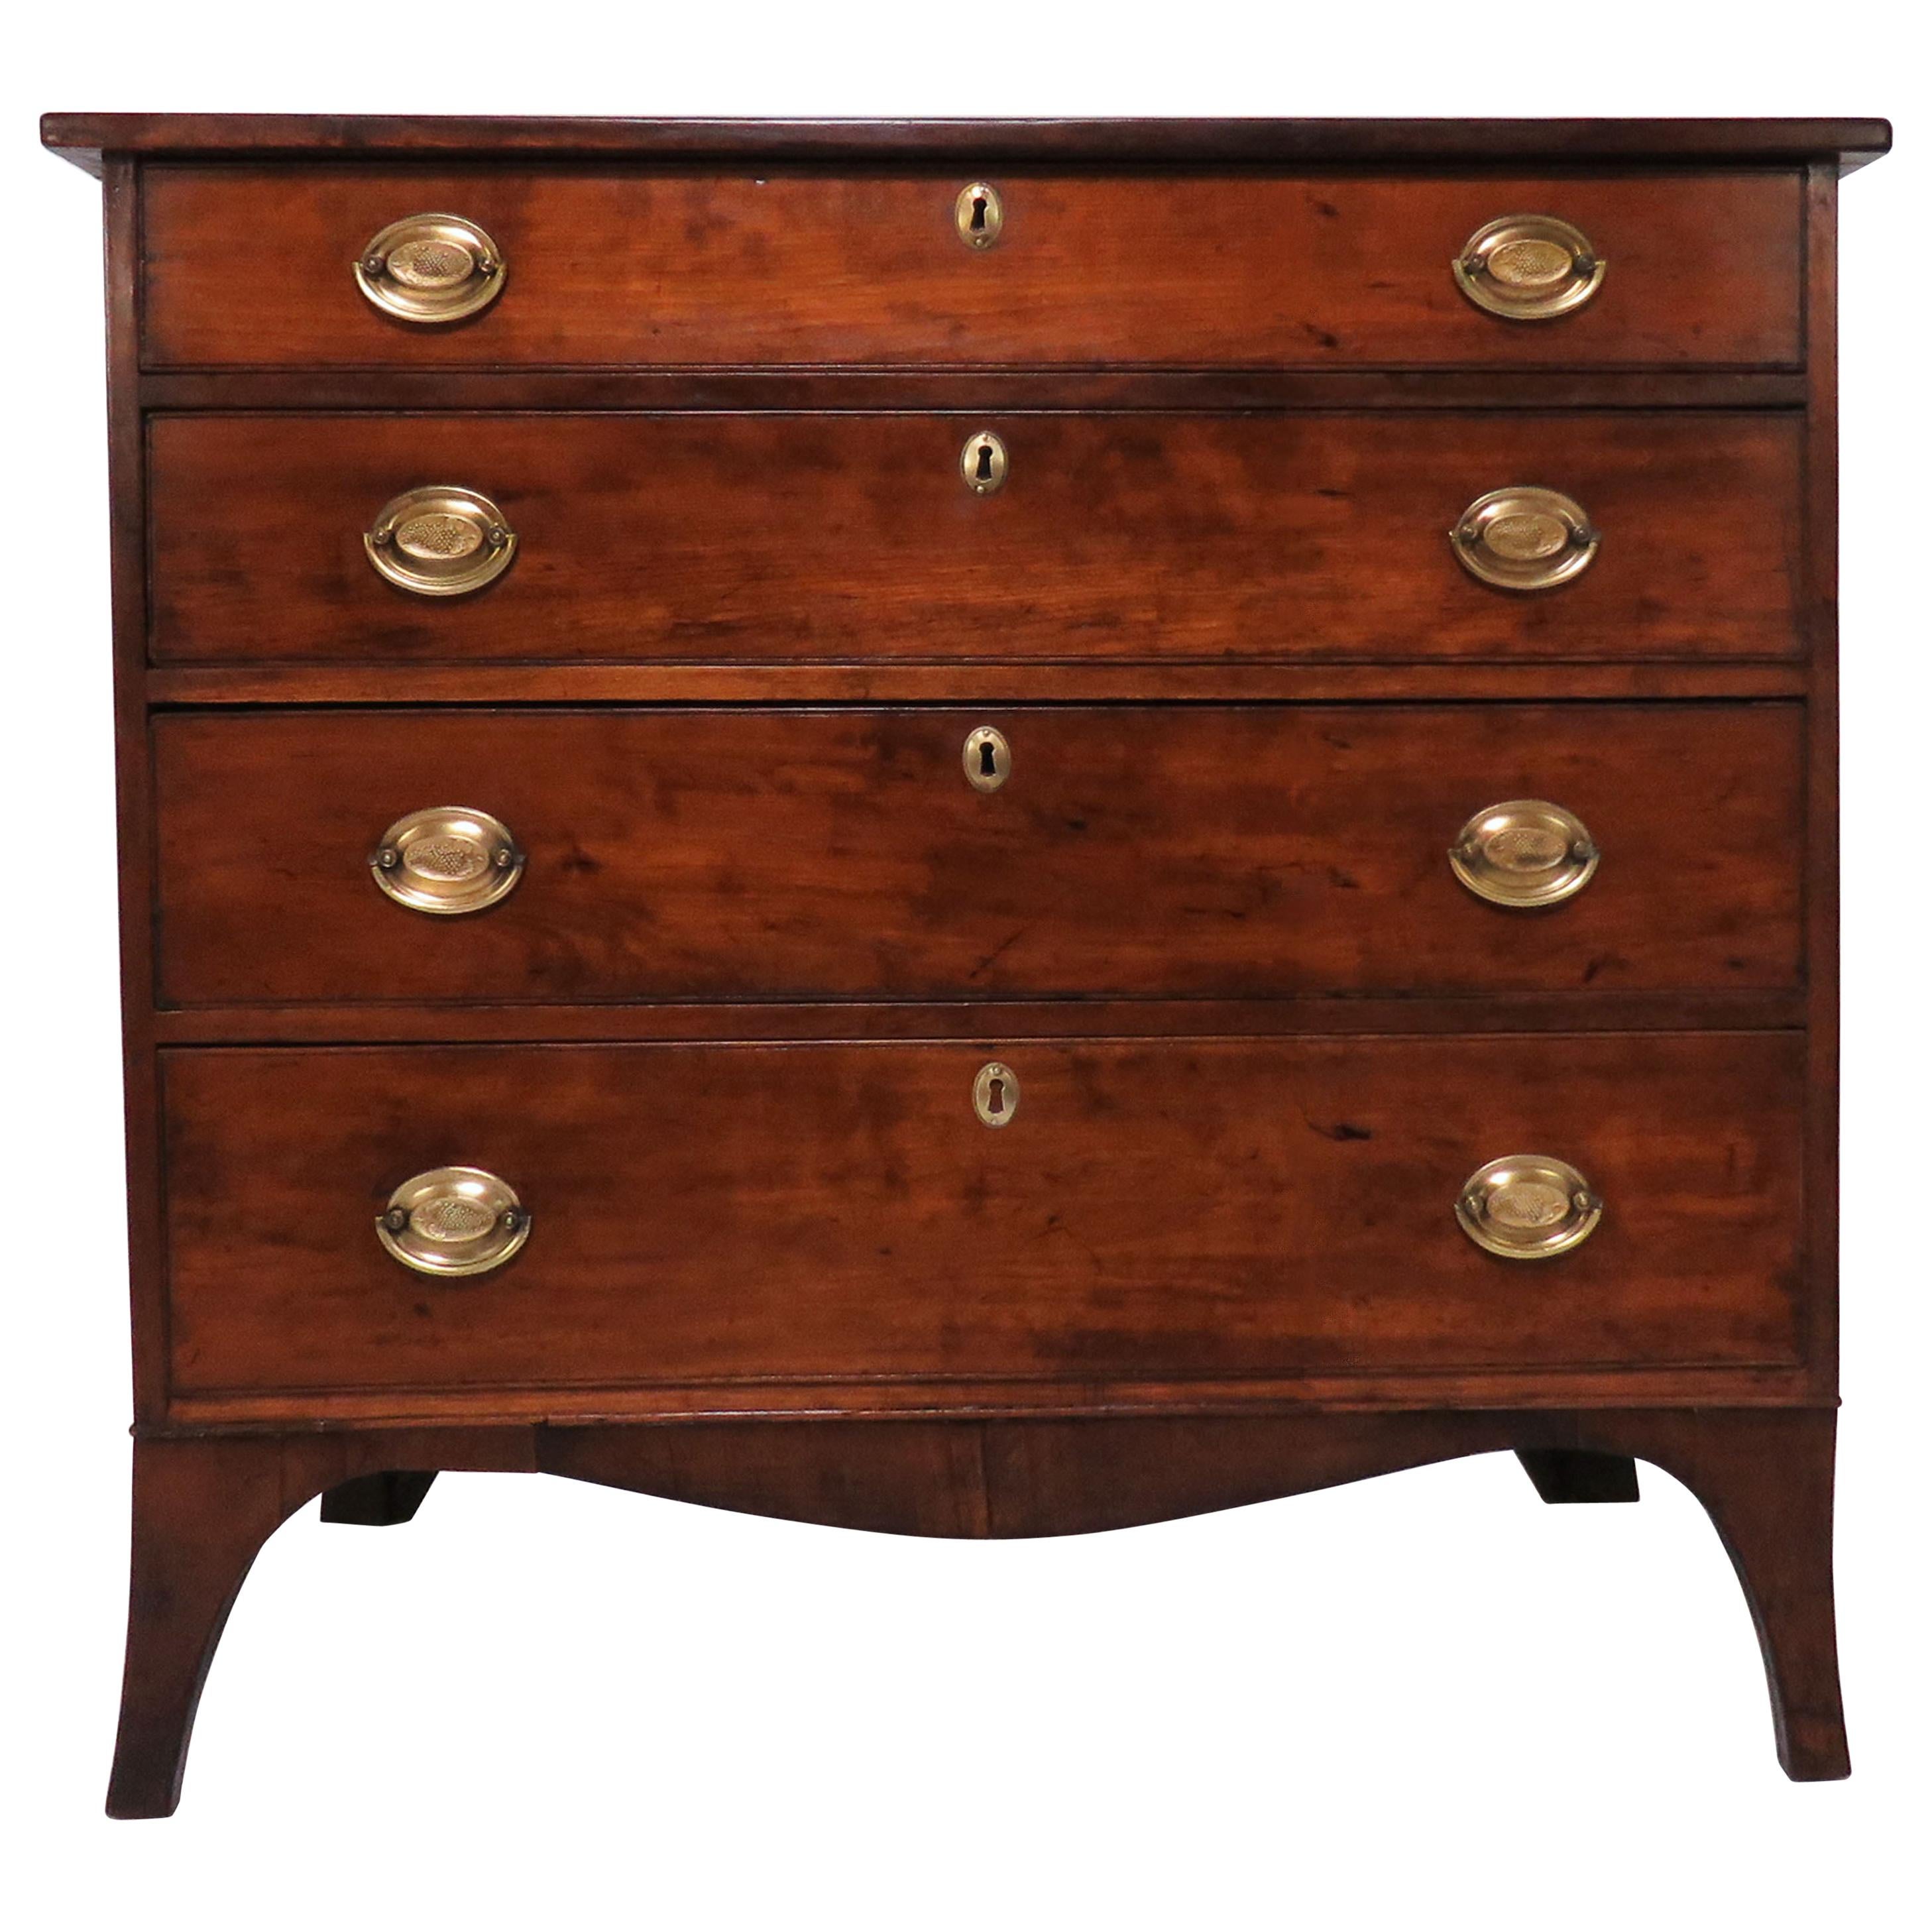 Late 18th Century American Federal Hepplewhite Antique Chest of Drawers